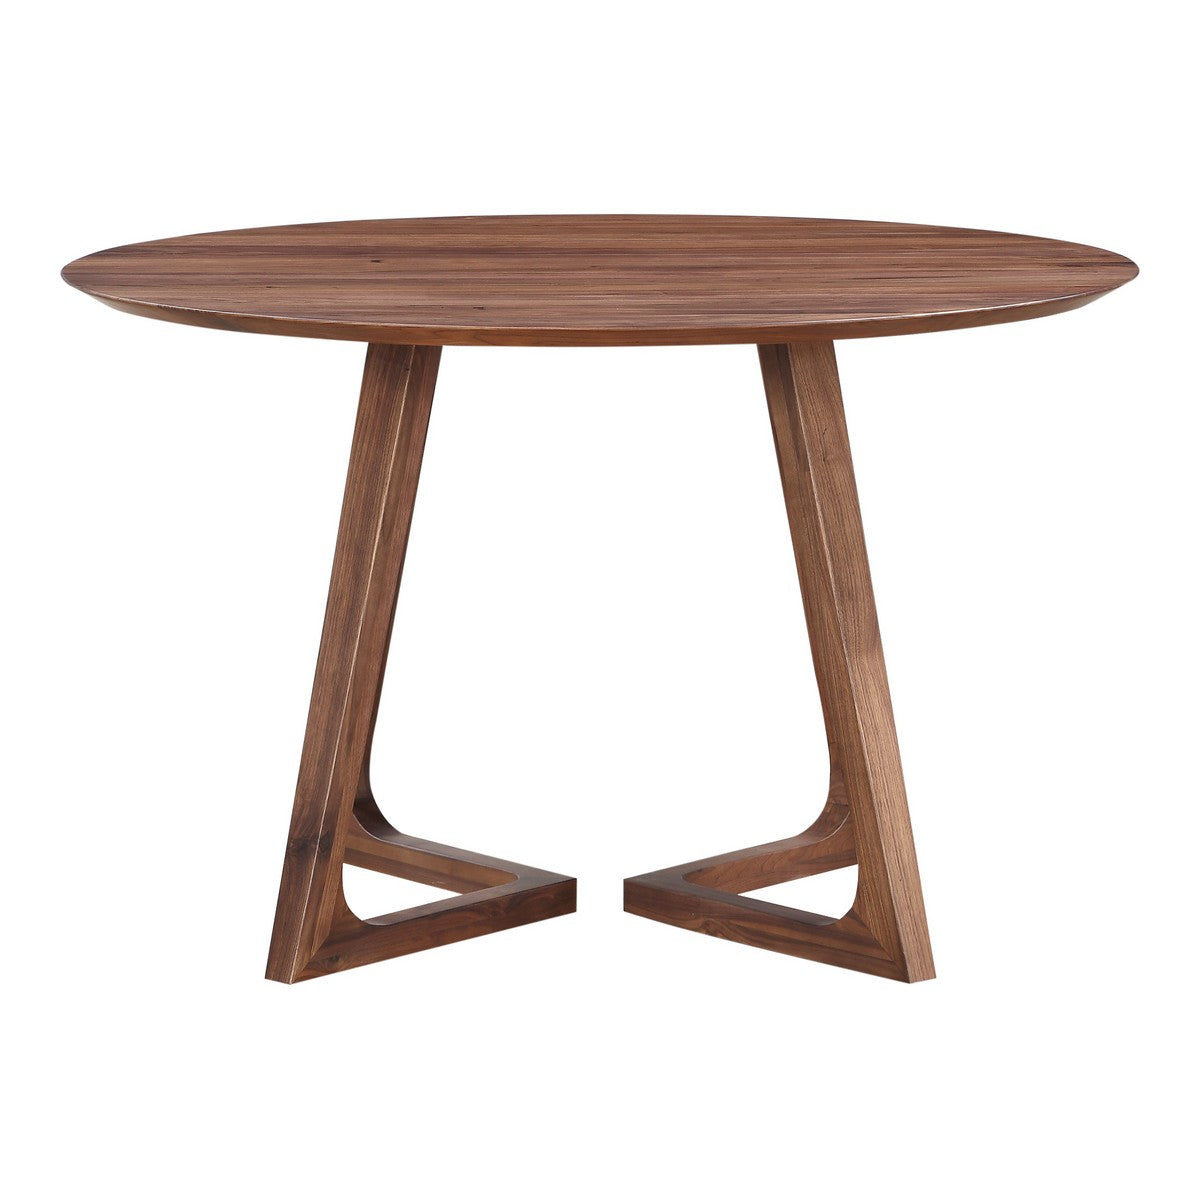 Moe's Home Collection Godenza Dining Table Round Walnut - CB-1003-03